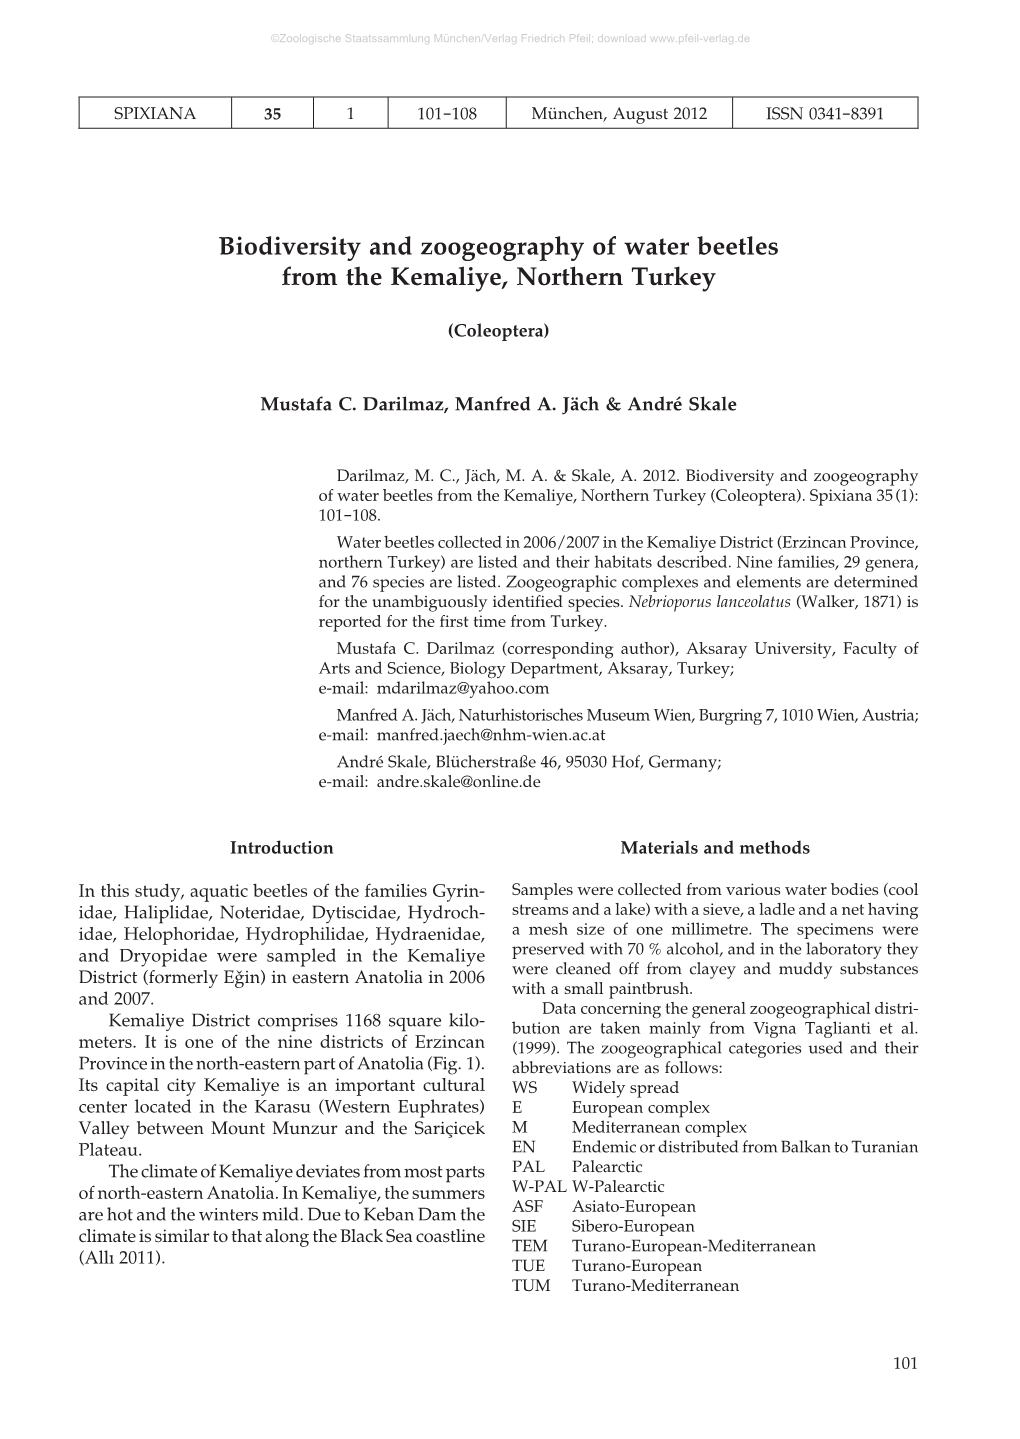 Biodiversity and Zoogeography of Water Beetles from the Kemaliye, Northern Turkey